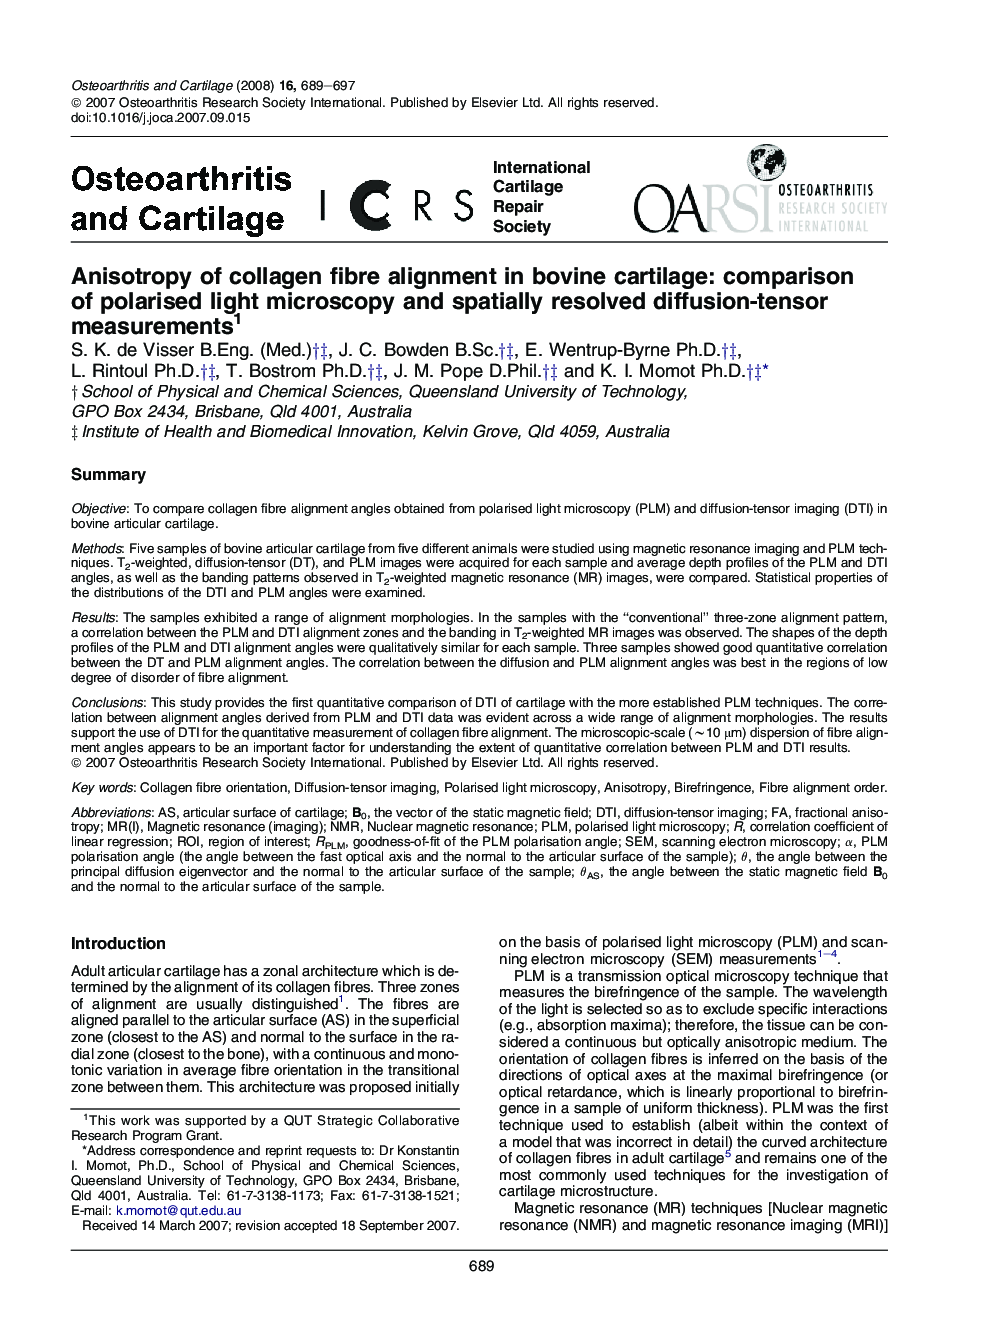 Anisotropy of collagen fibre alignment in bovine cartilage: comparison of polarised light microscopy and spatially resolved diffusion-tensor measurements 1